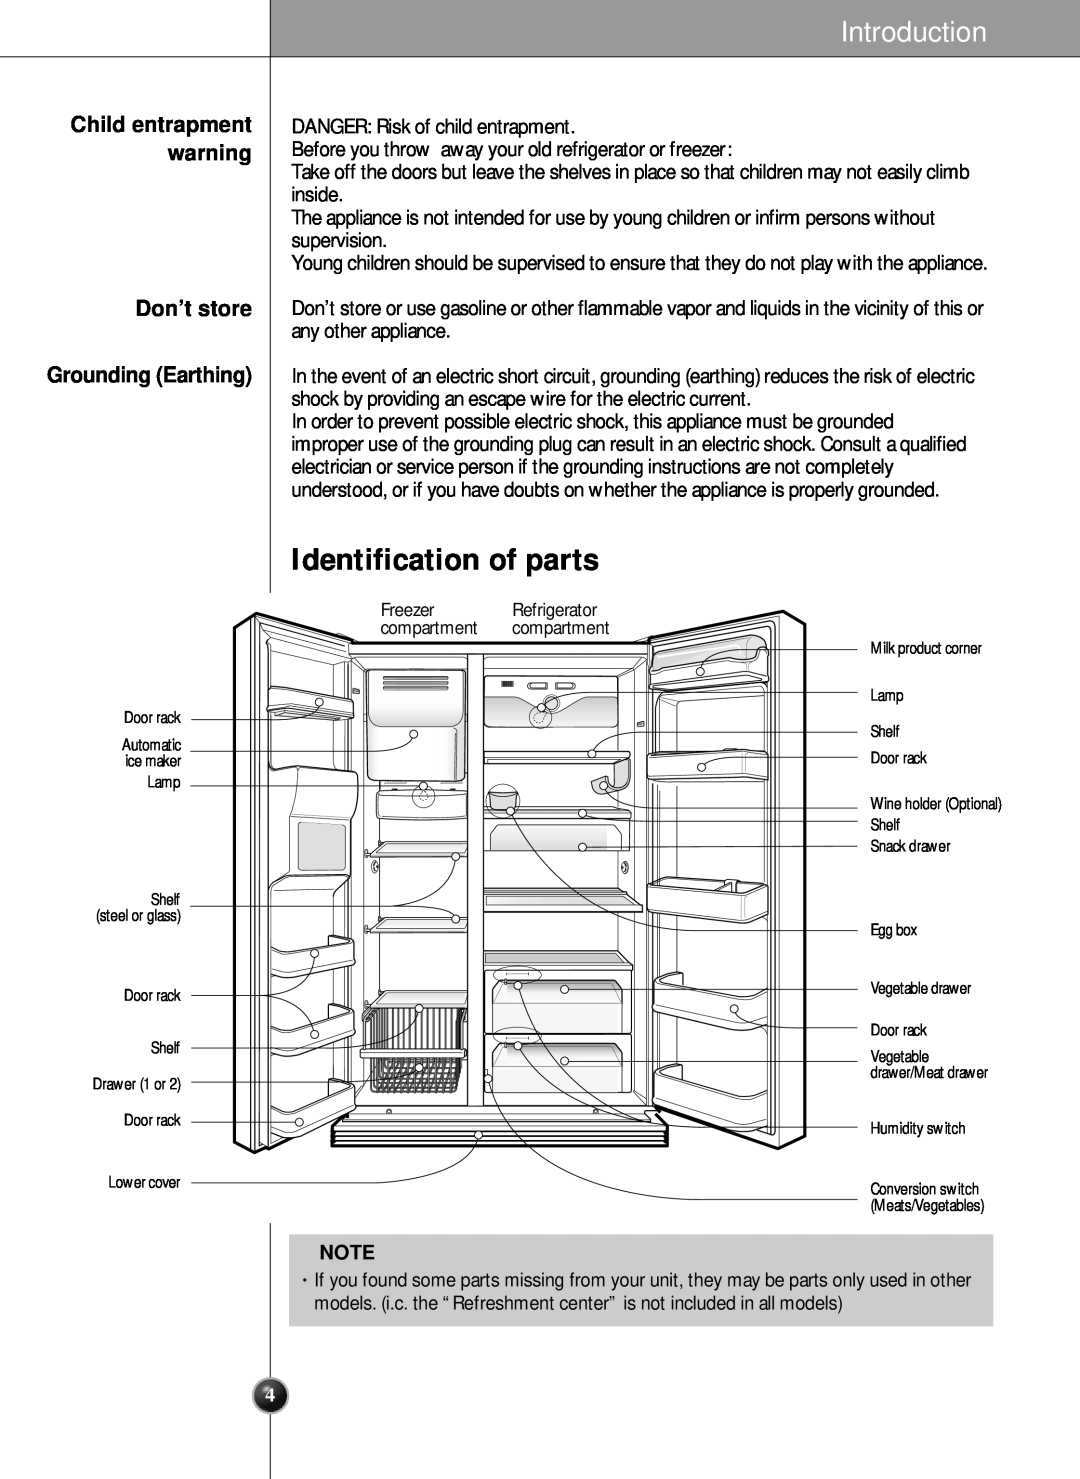 LG Electronics LRSC21951ST manual Identification of parts, Don’t store Grounding Earthing, Introduction 